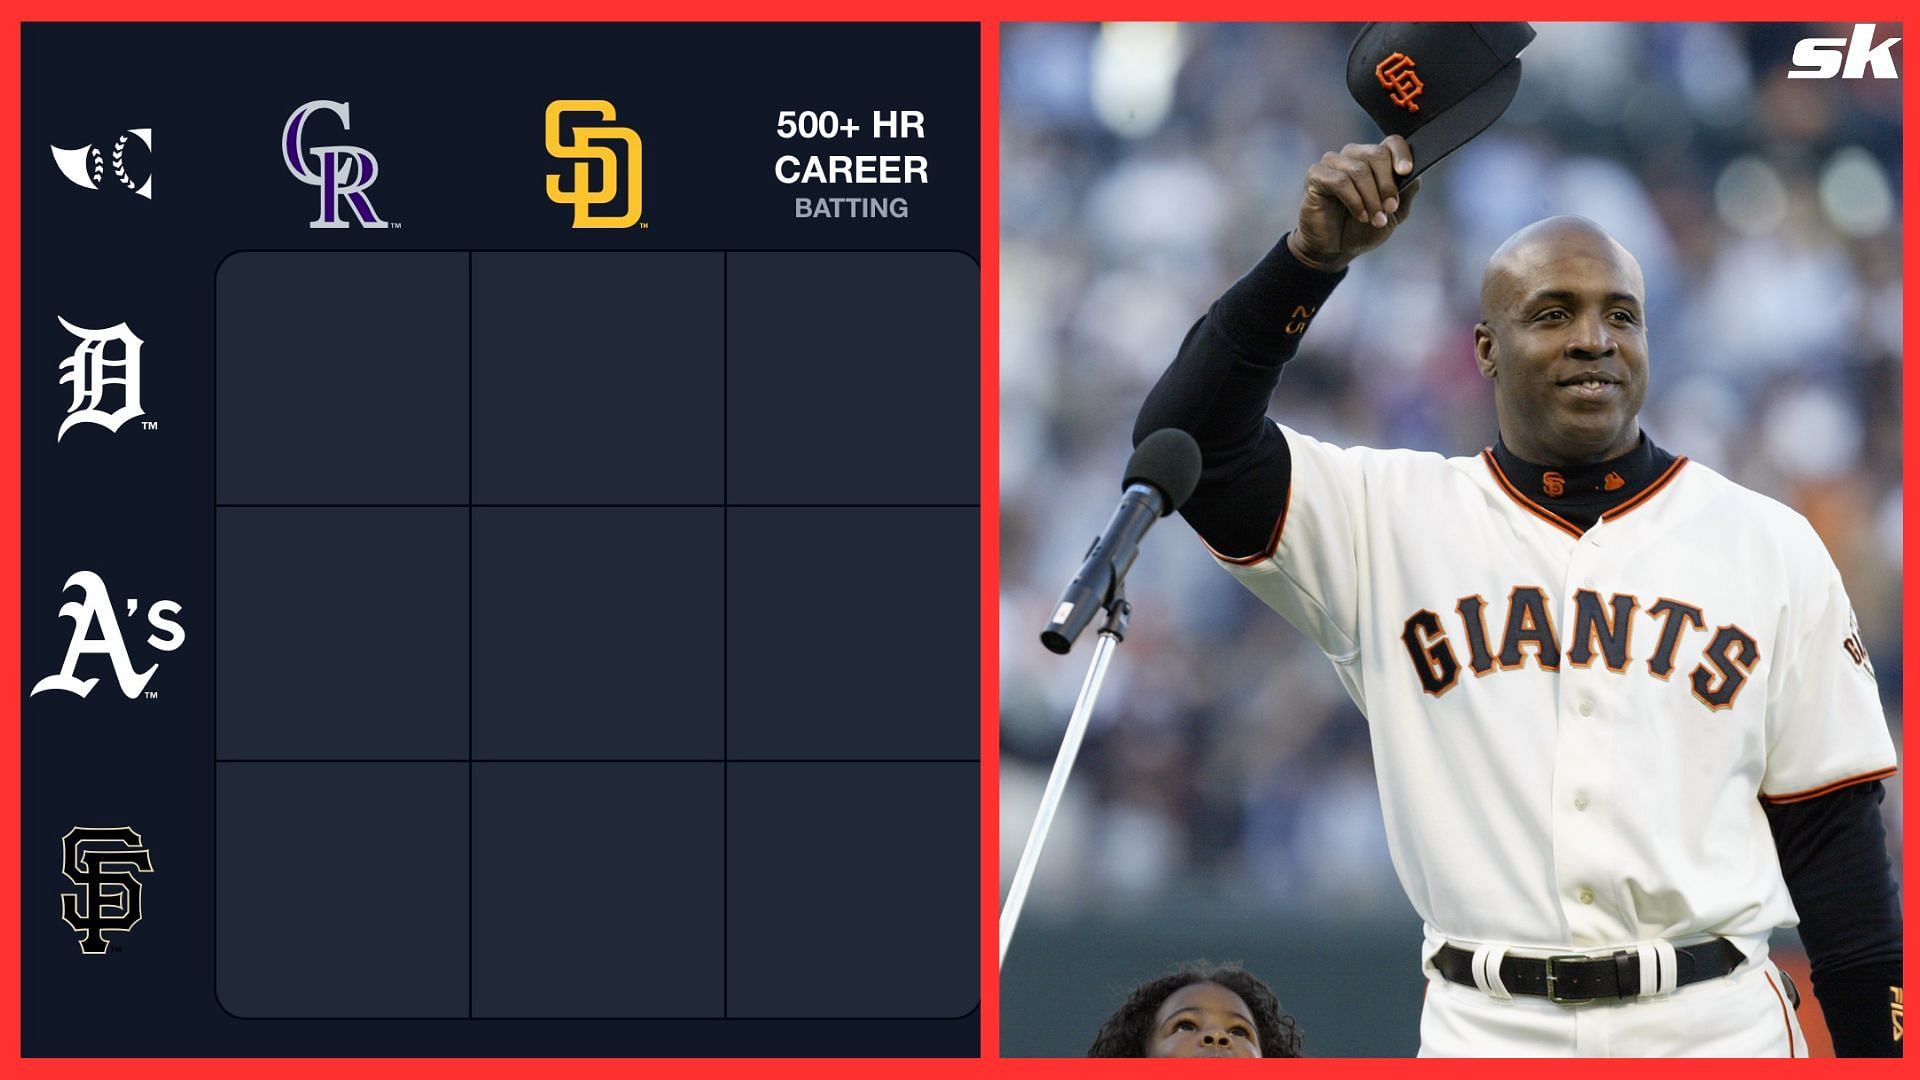 Here's what the giants lineup might look like in 2023. : r/mlb